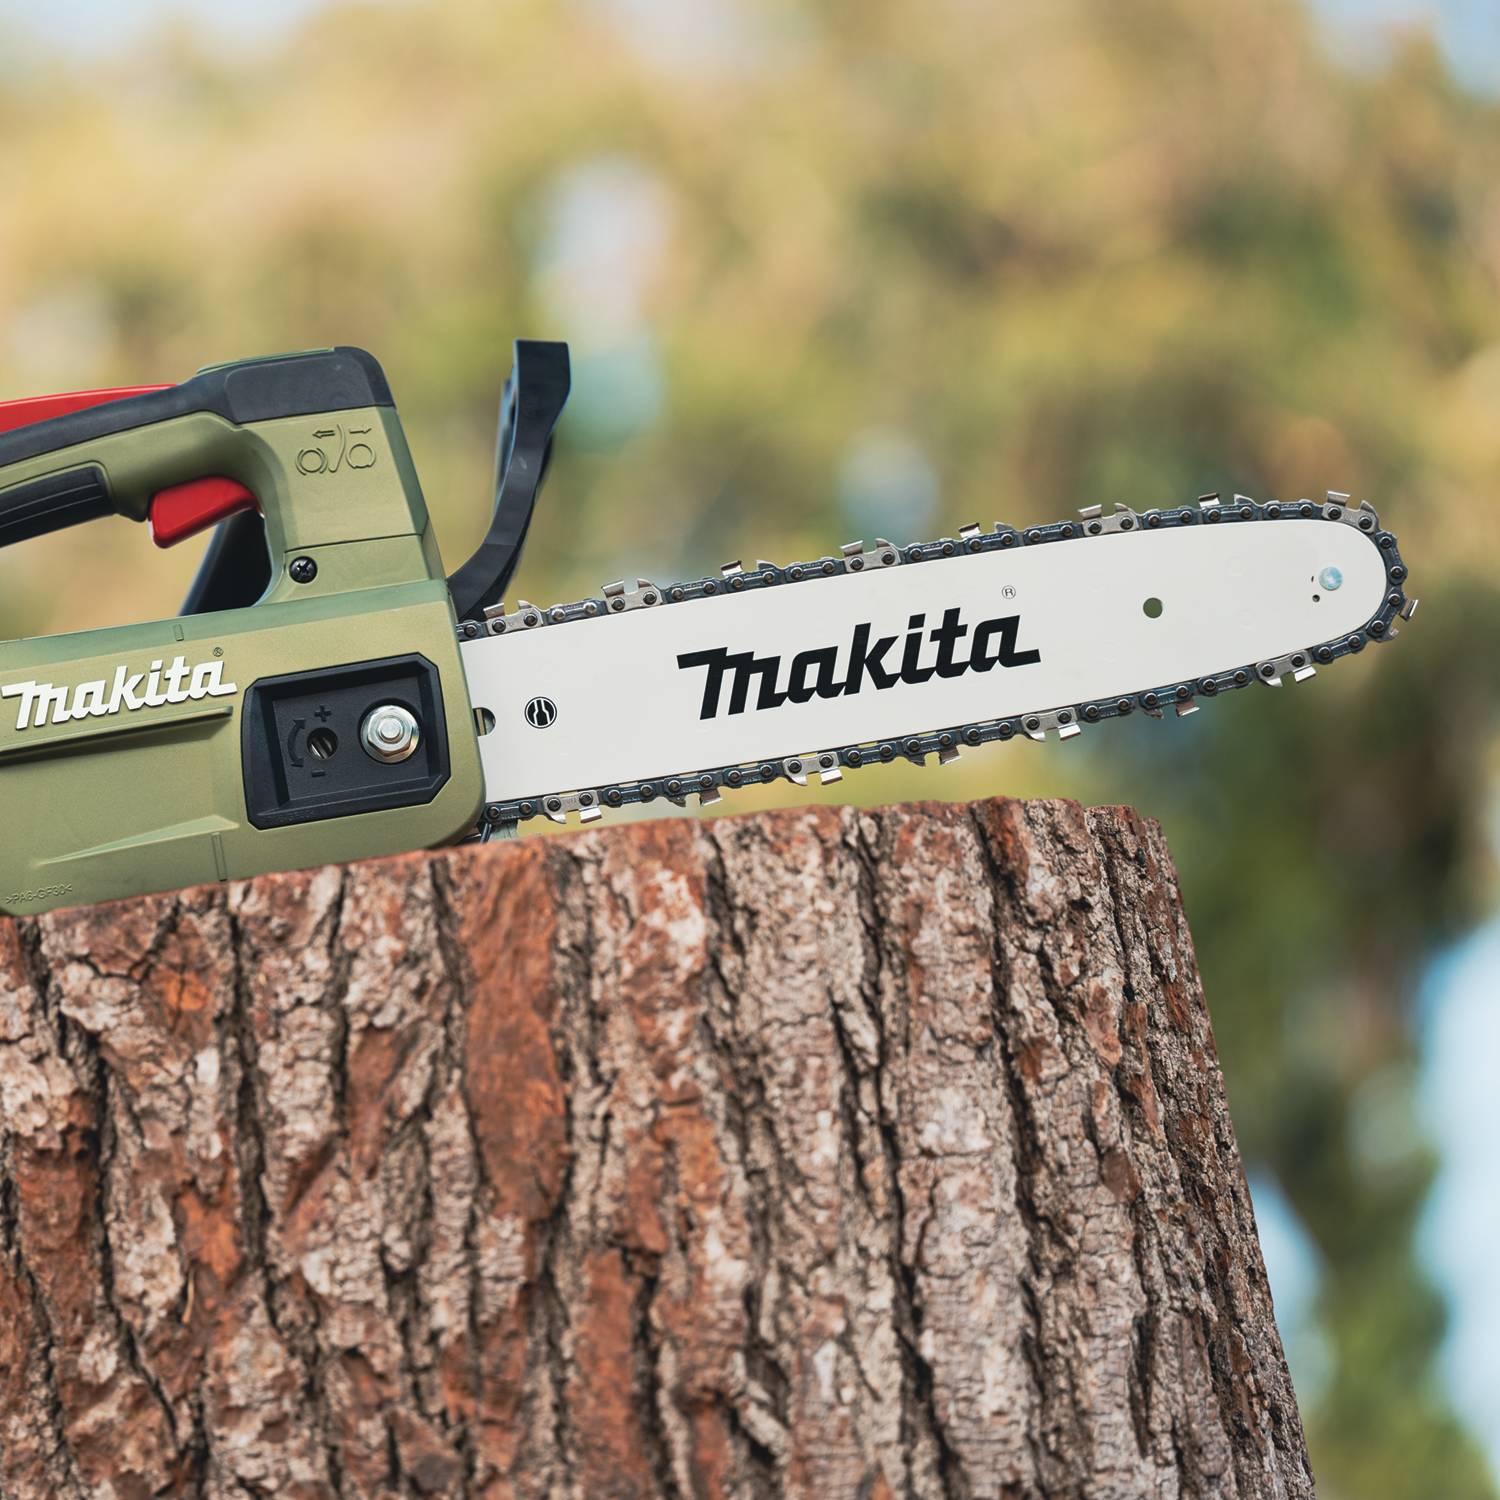 Makita ADCU10Z Outdoor Adventure 18V LXT Lithium-Ion Brushless Cordless 12" Top Handle Chain Saw (Tool Only)